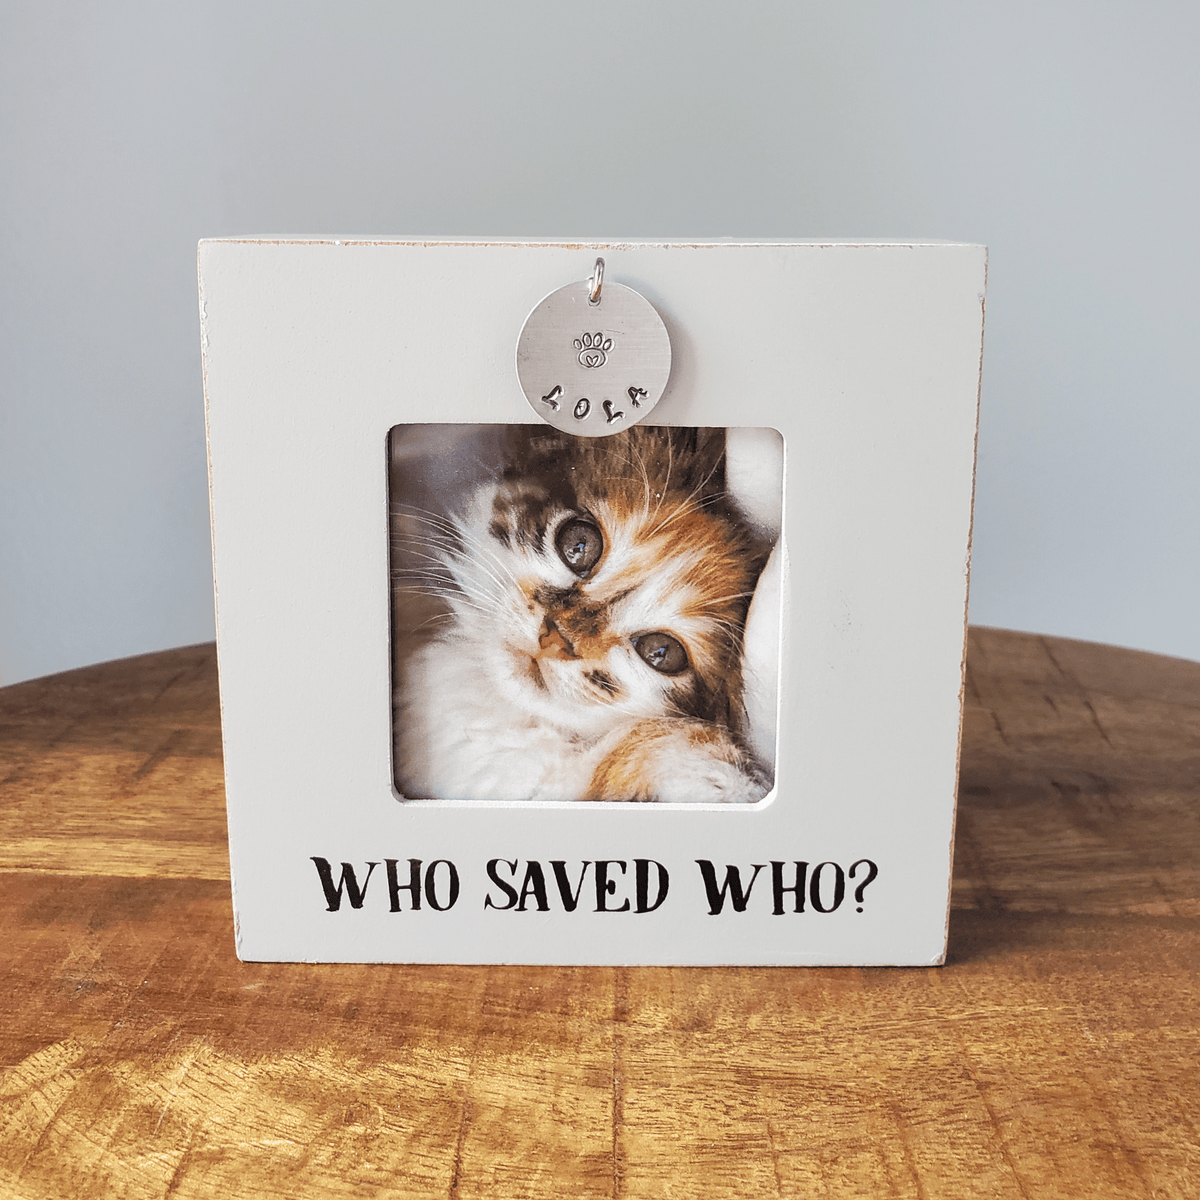 Who Saved Who Pet Photo Frame with Personalized Charm with Pet Name